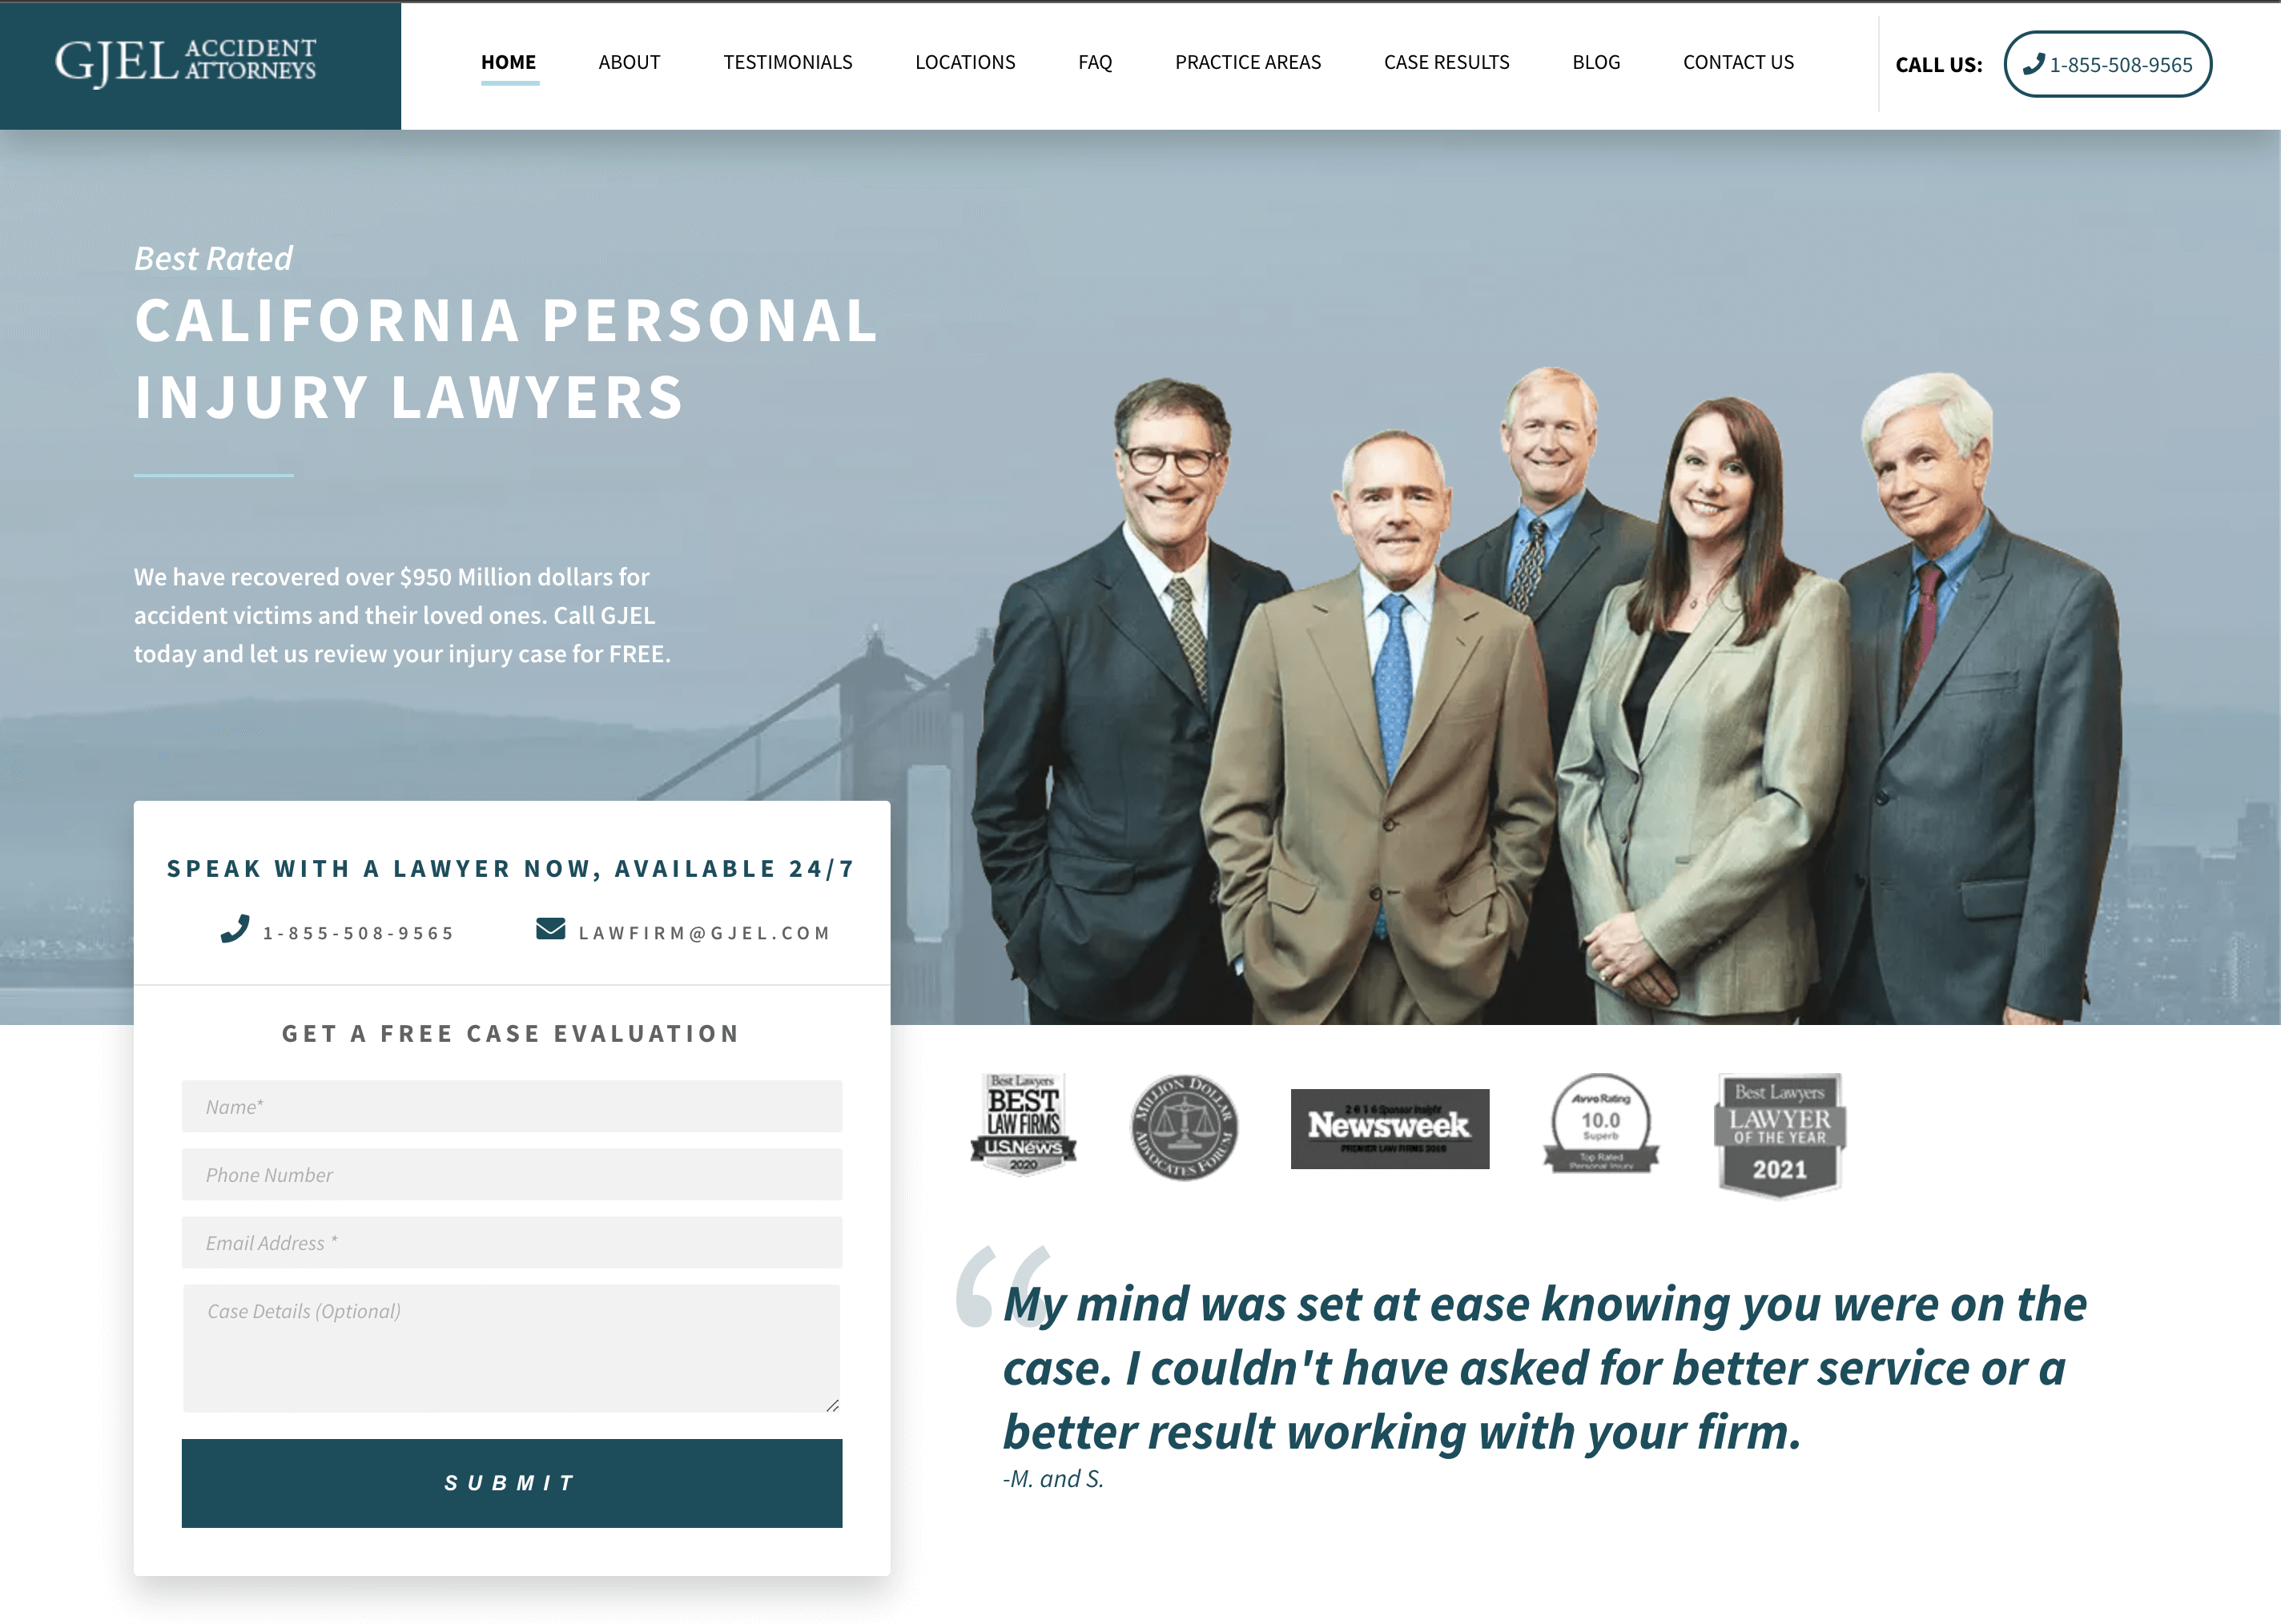 GJEL's homepage featuring a photo of the lawyers, a contact form, and logos of awards they've won